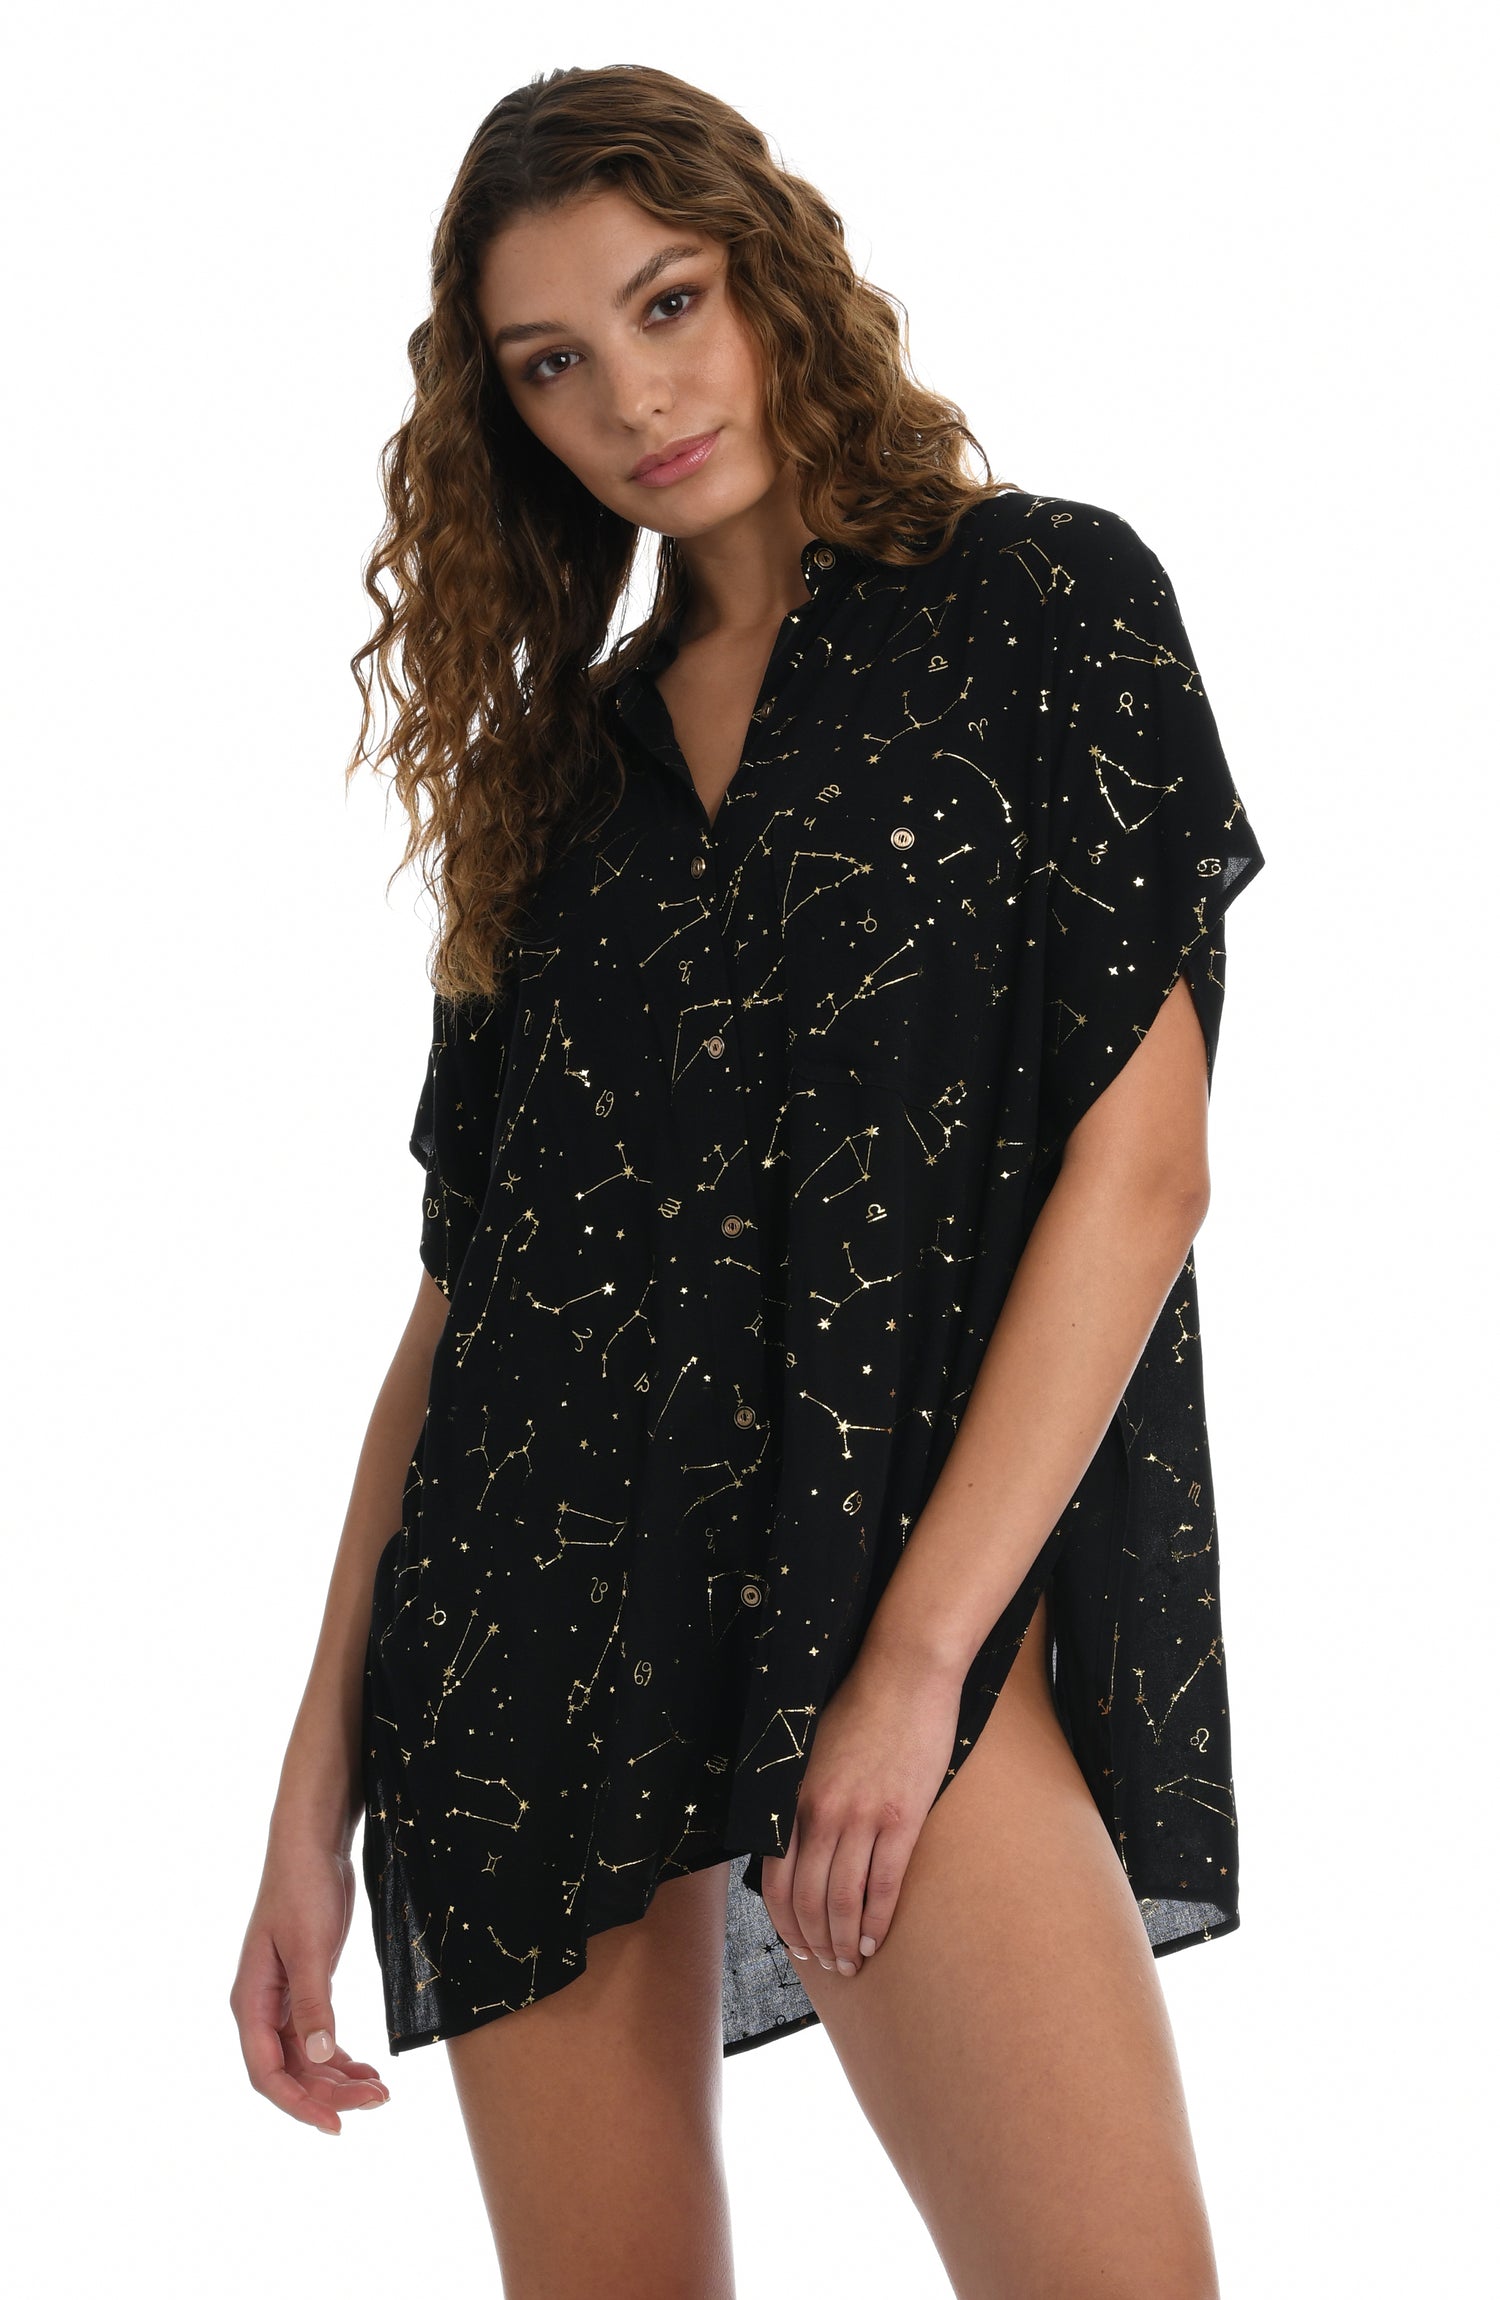 Model is wearing a solid black colored resort button down cover up shirt from our Zodiac collection.